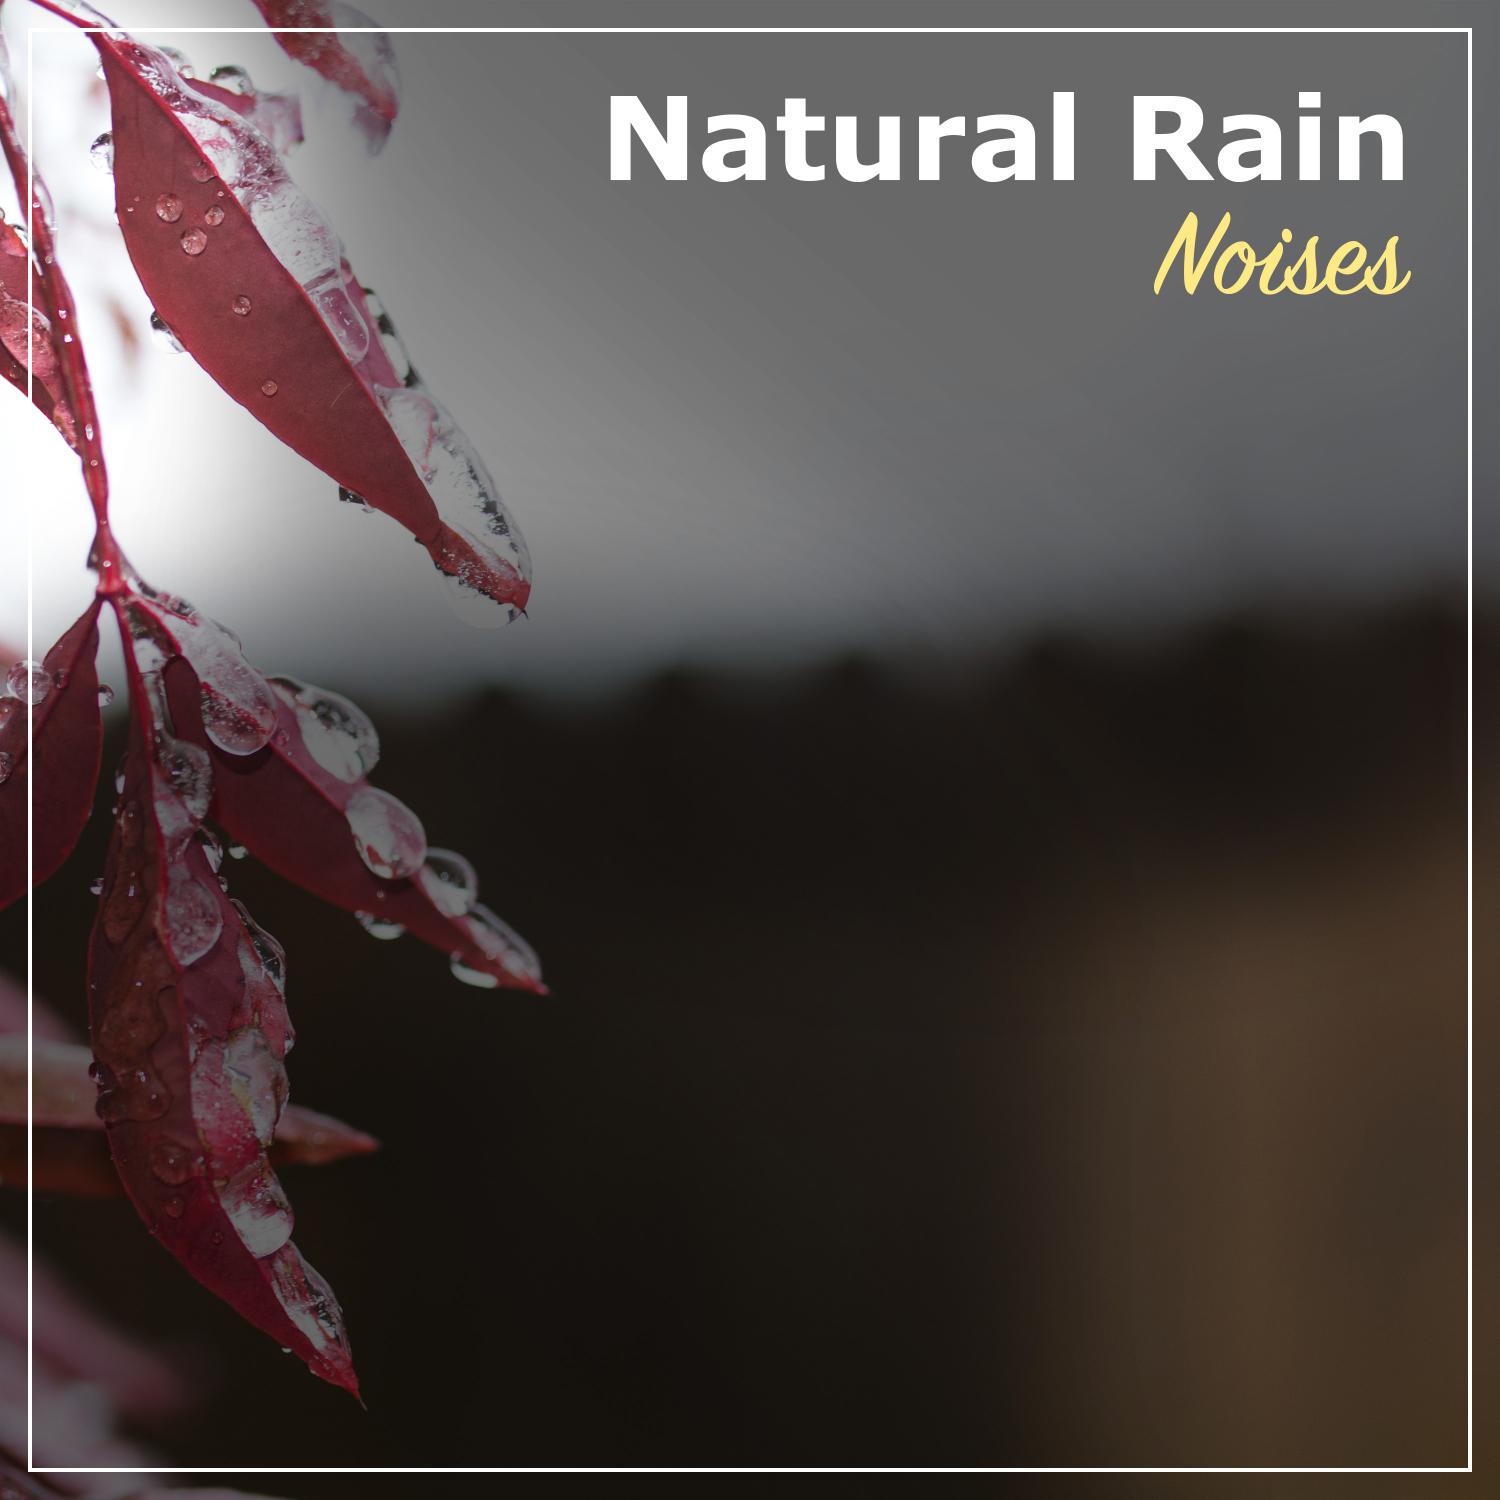 18 Natural Rain Noises - Great for Sleeping, Meditation, Focus, Yoga or Relaxing